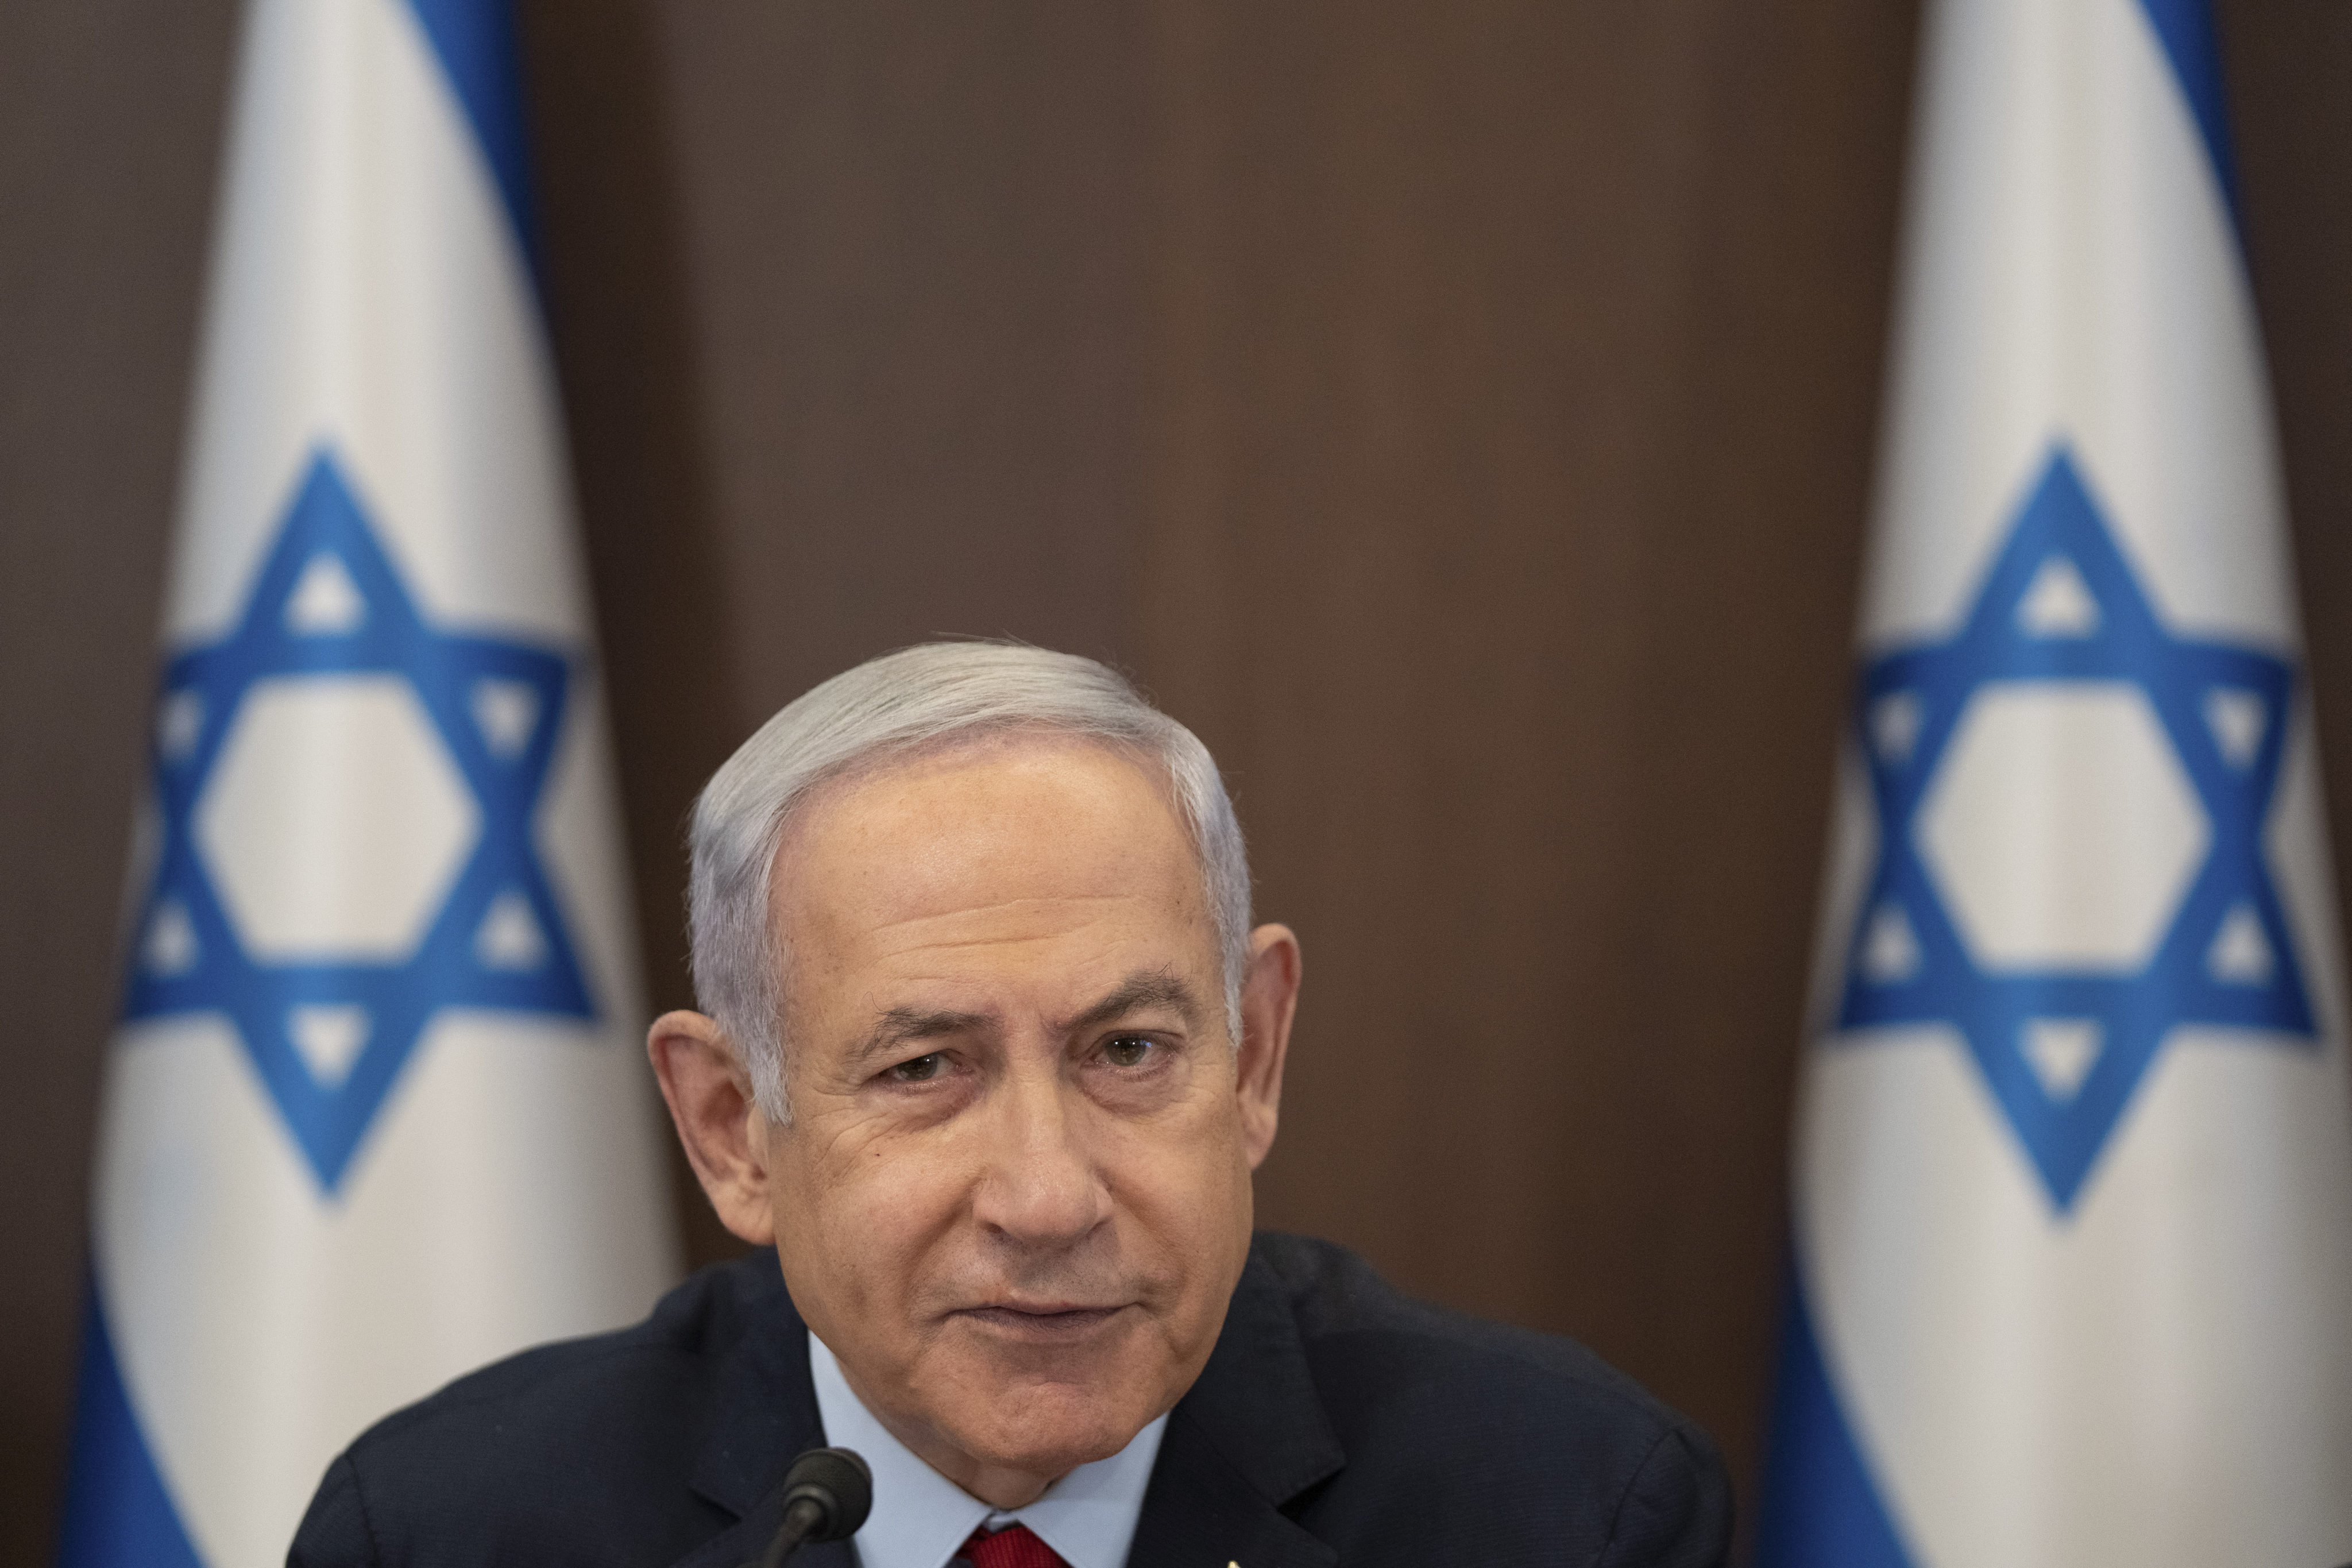 Israeli Prime Minister Benjamin Netanyahu chairs a cabinet meeting in Jerusalem on June 18. His trial looking at alleged corruption began in 2020 and has featured over 40 prosecution witnesses. Photo: AP